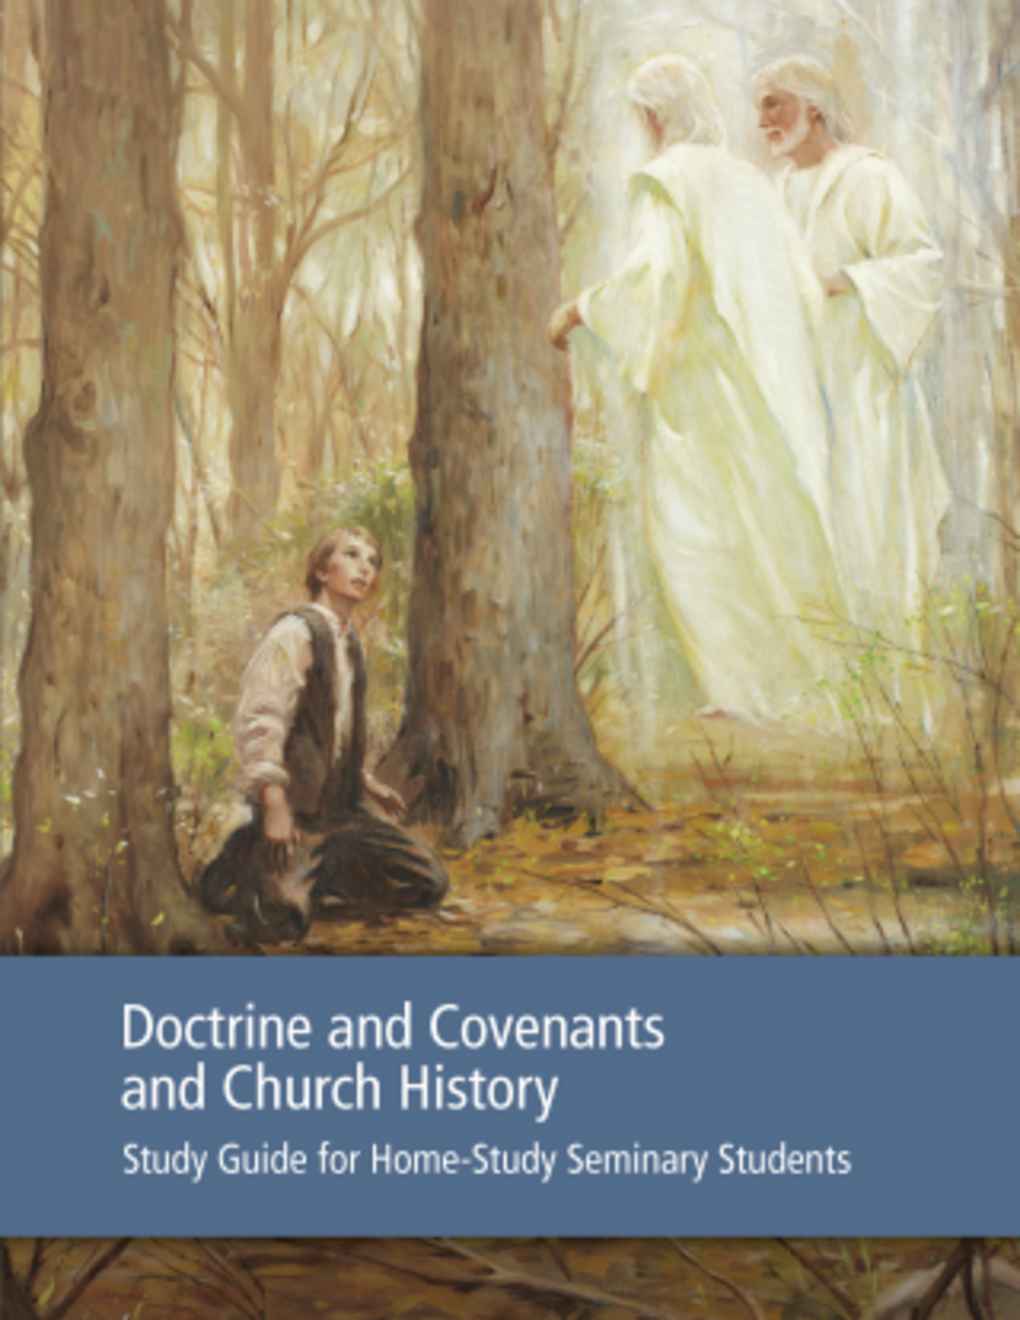 Doctrine and Covenants and Church History Study Guide for Home-Study Seminary Students